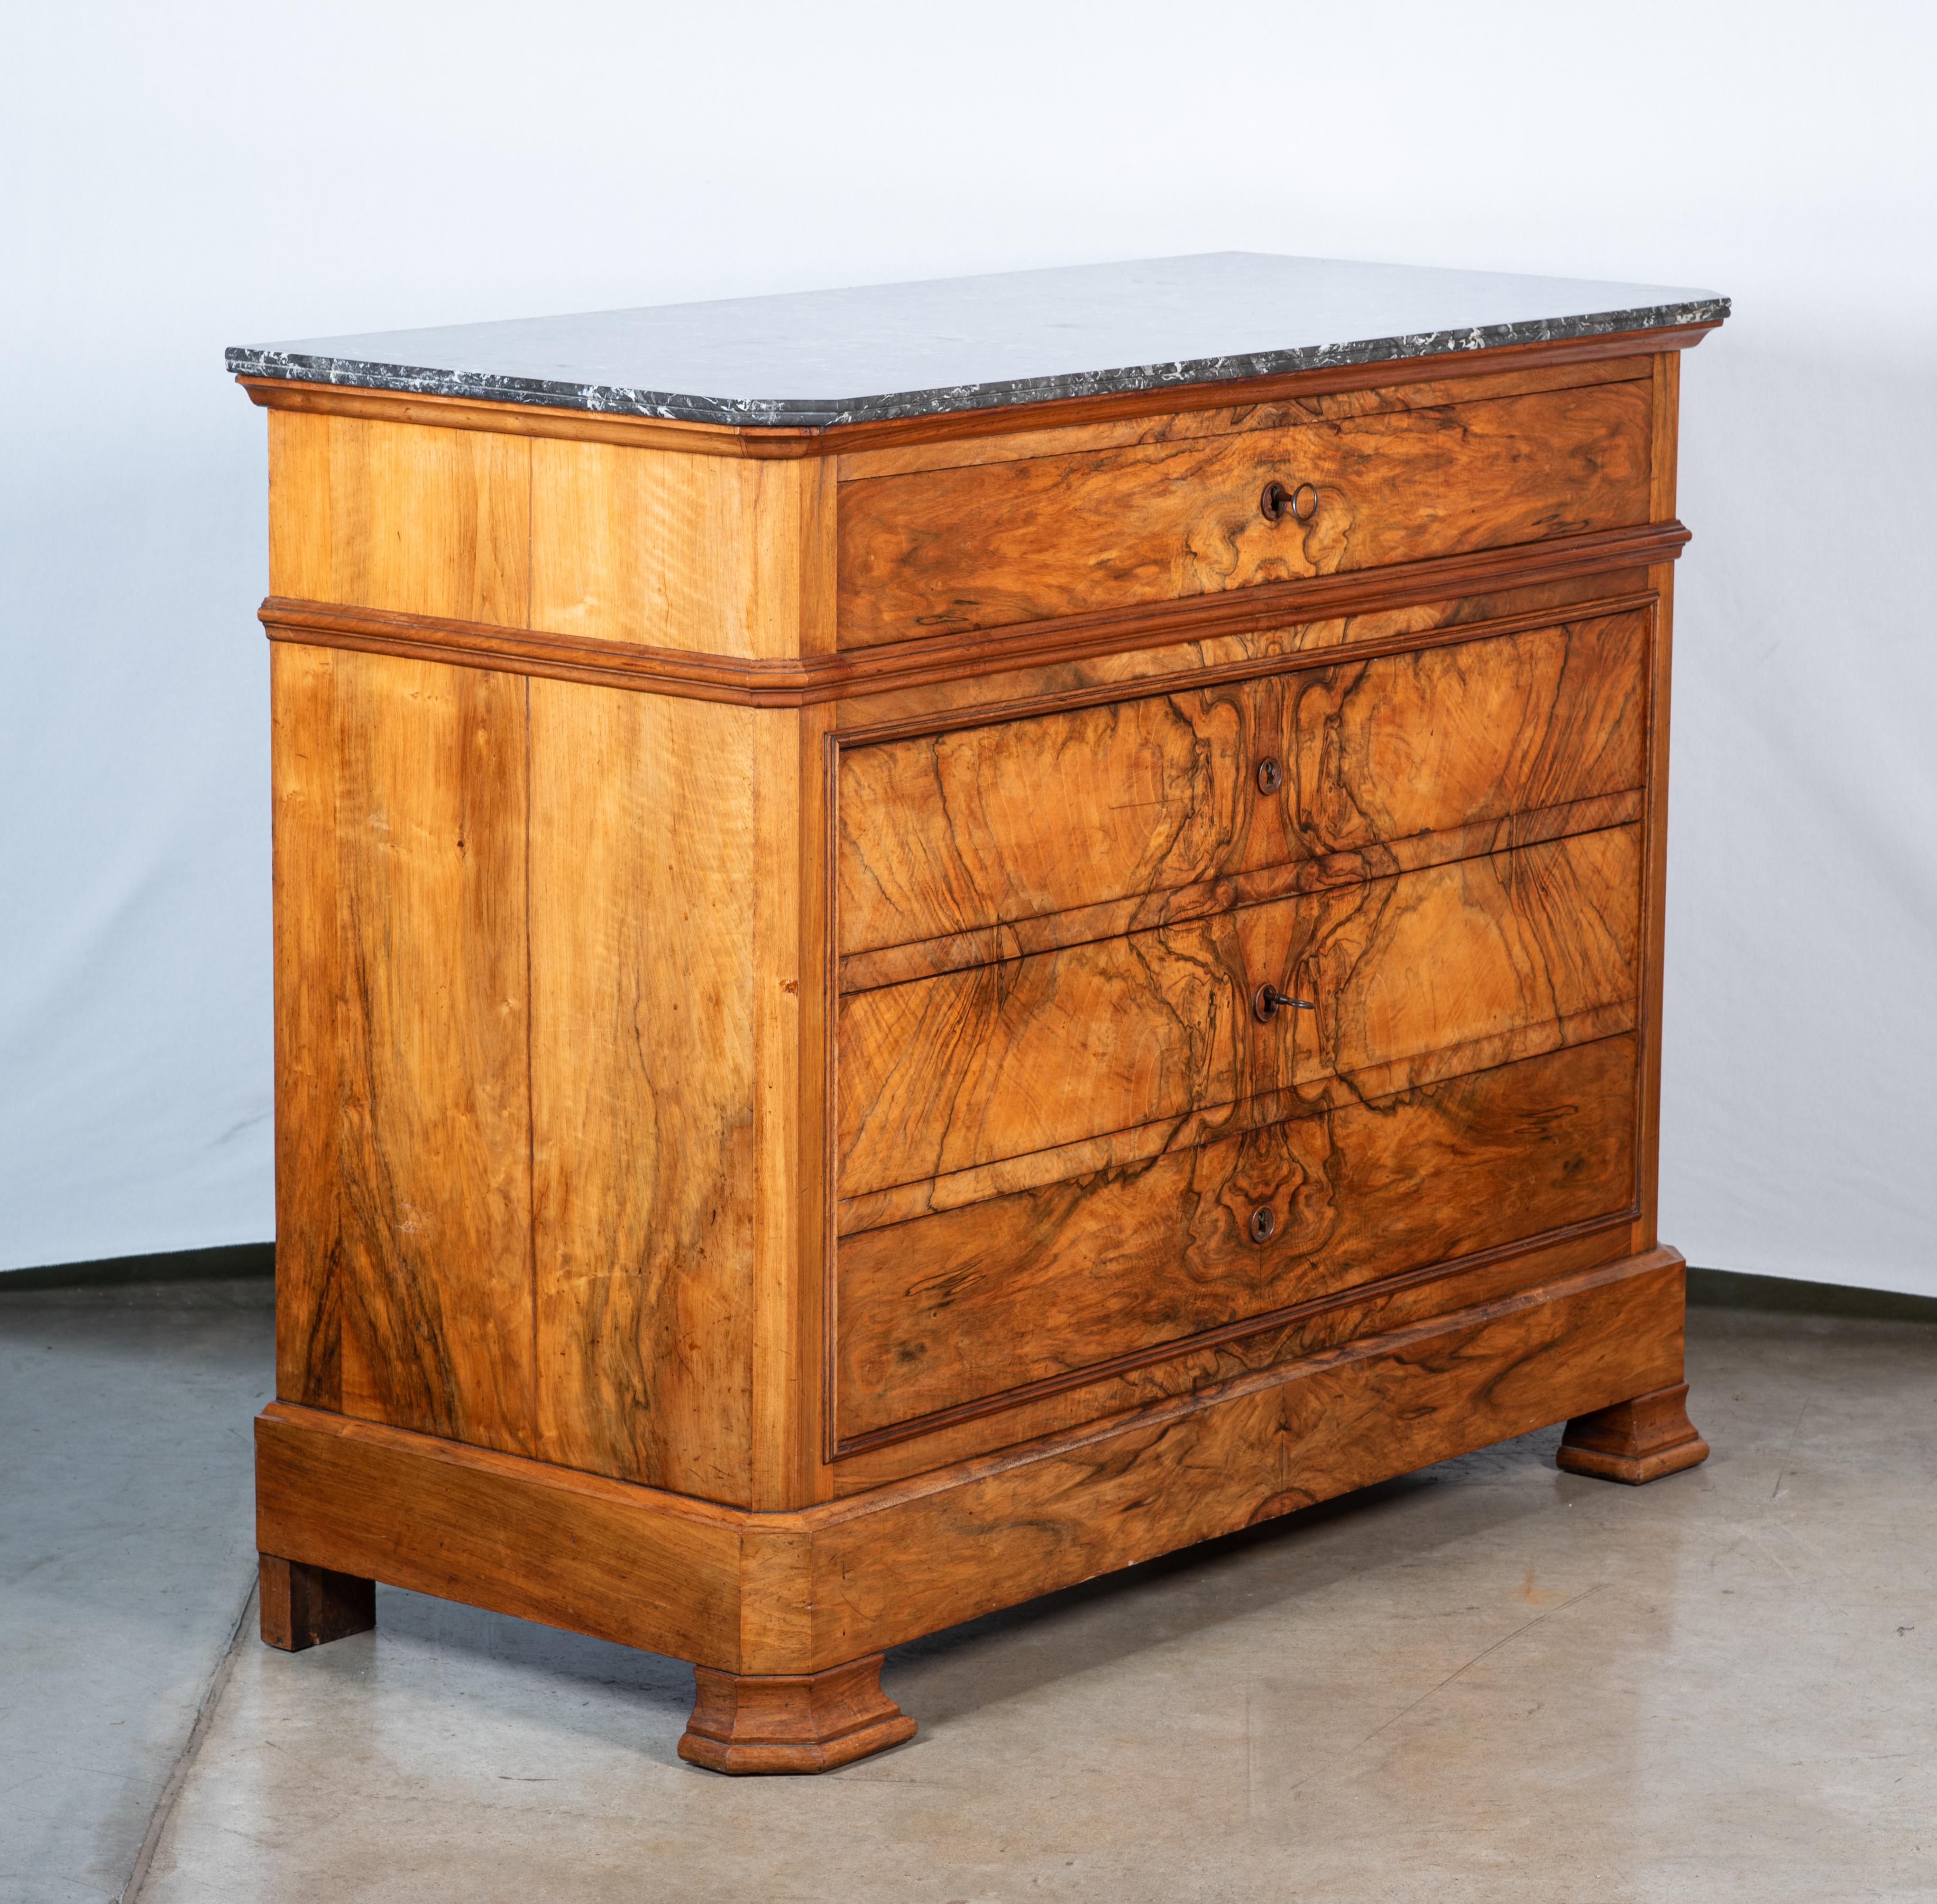 19th Century French Louis Philippe Walnut Veneer Commode In Good Condition For Sale In San Antonio, TX